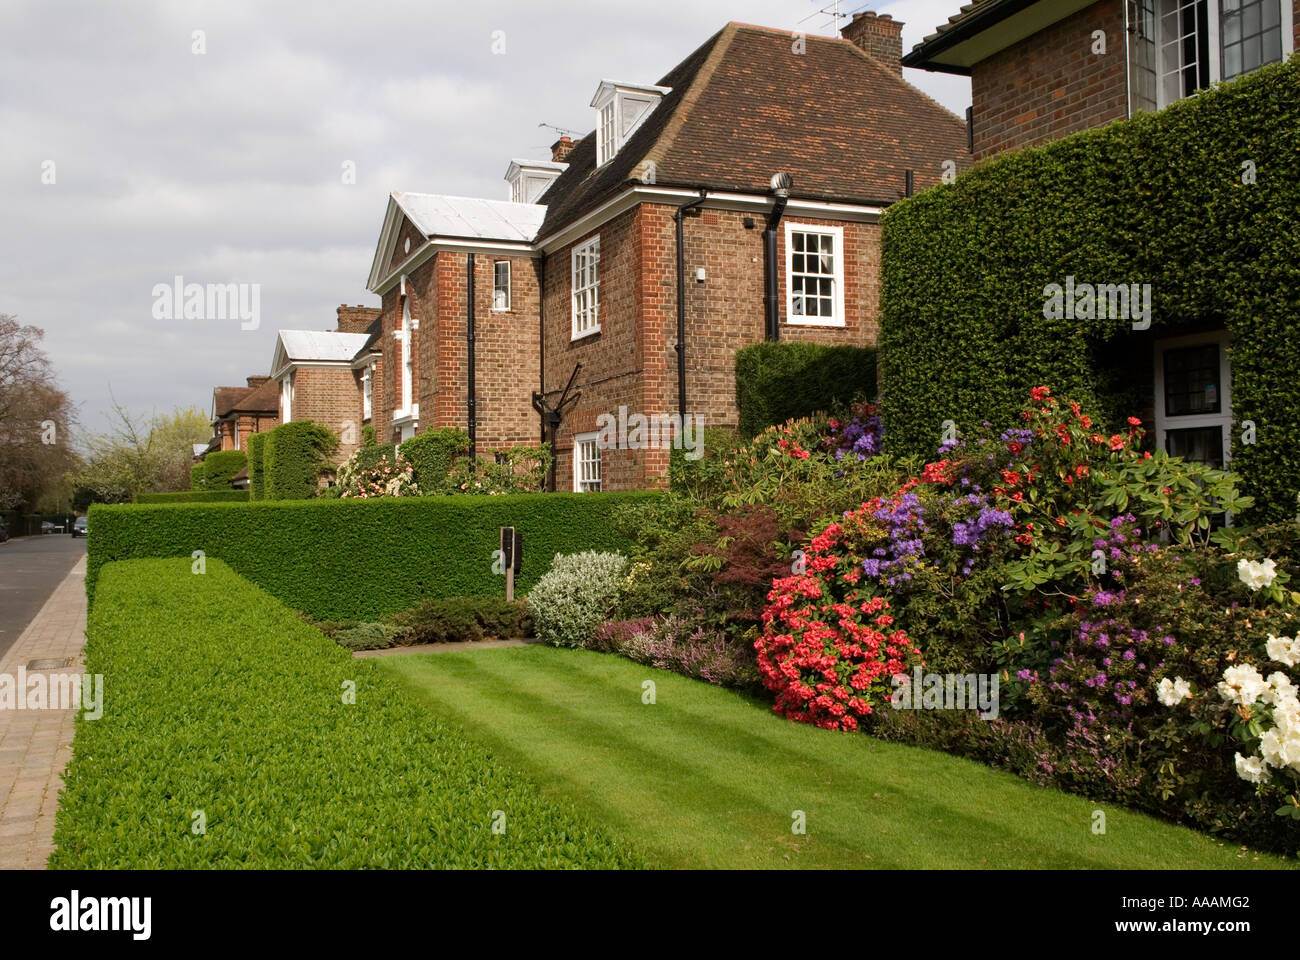 Hampstead Garden suburb, London  NW3 Neat tidy front garden lawn 'Turner Drive', England 2000s UK HOMER SYKES Stock Photo